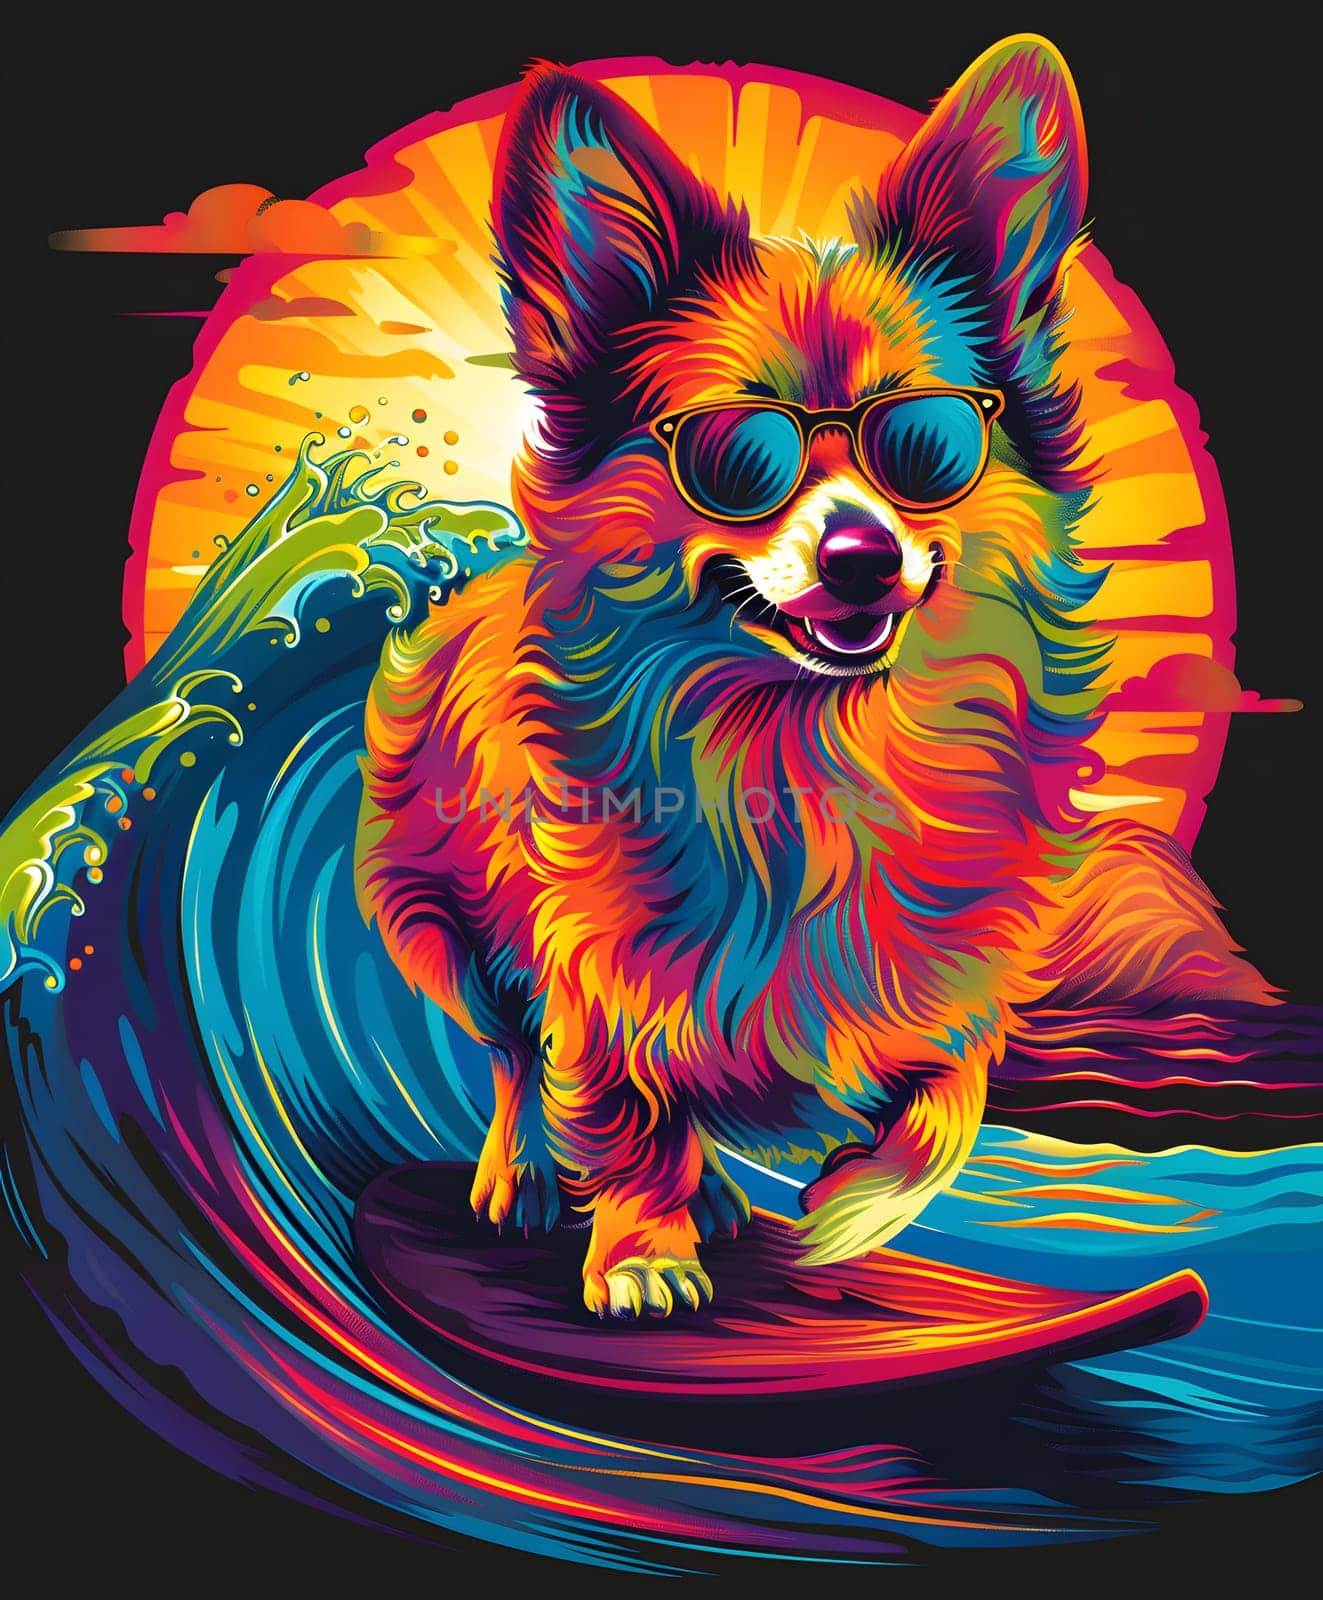 An Electric blue Dog breed with Whiskers is surfing on a Magenta surfboard by Nadtochiy